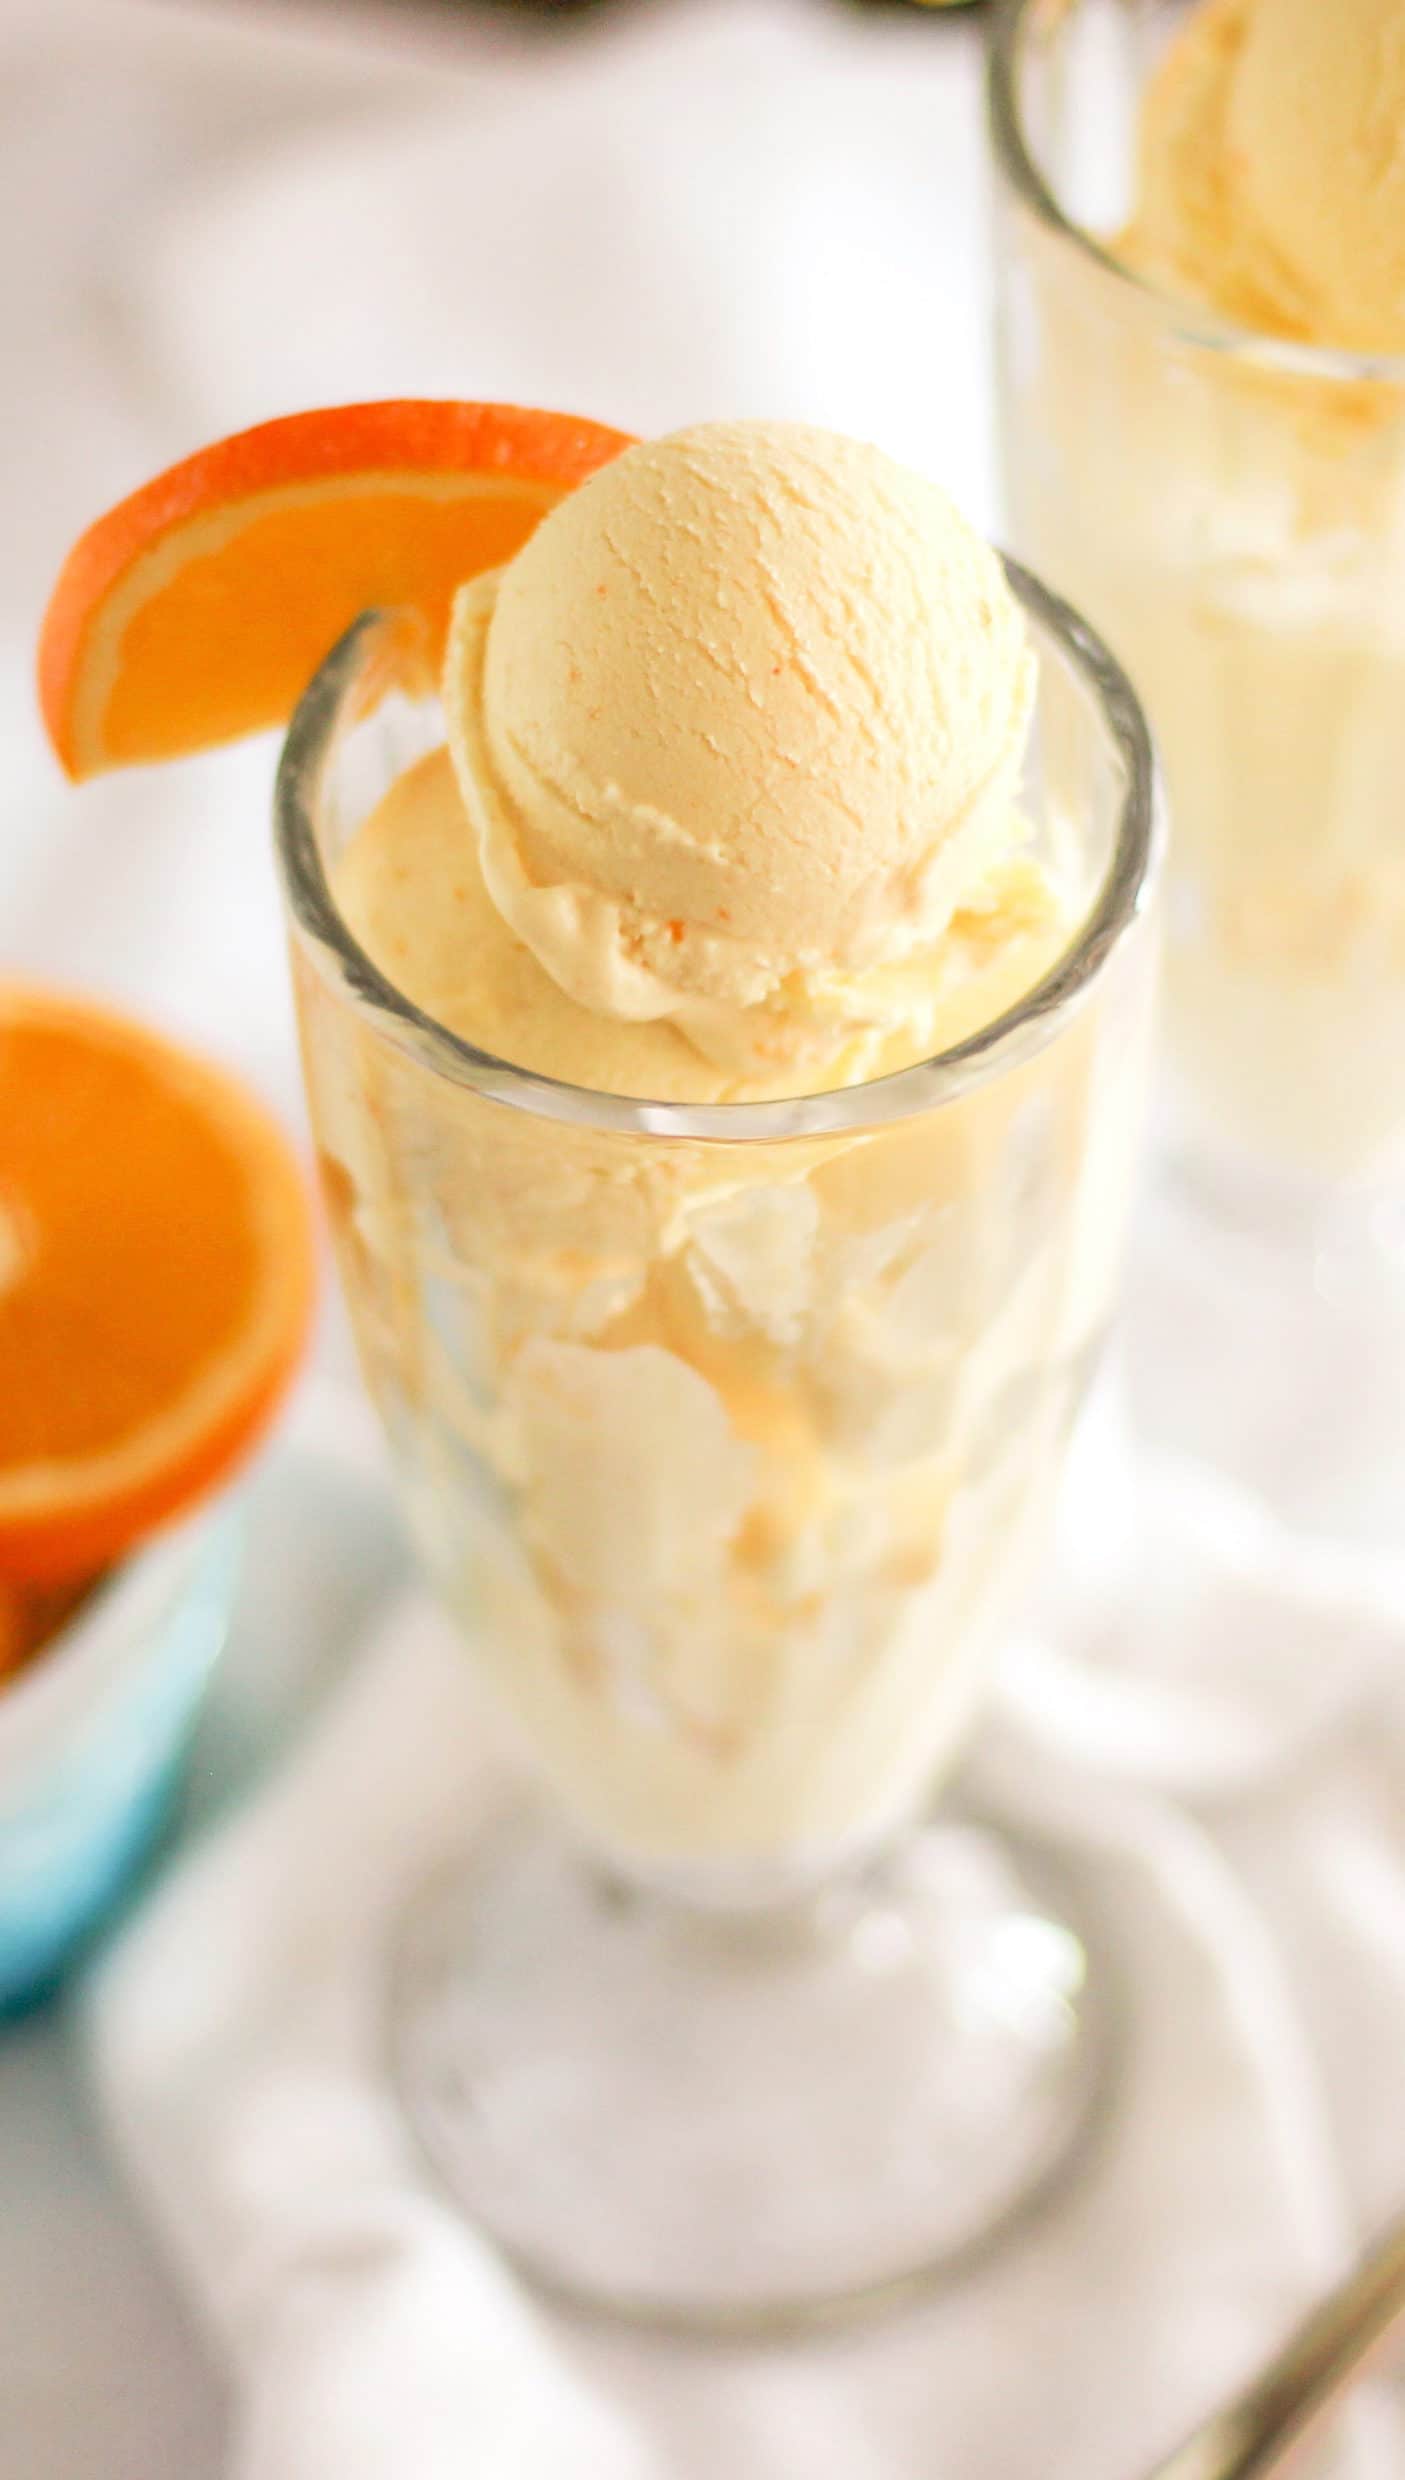 Healthy Orange Creamsicle Ice Cream (refined sugar free, low carb, high protein) - Healthy Dessert Recipes at Desserts with Benefits